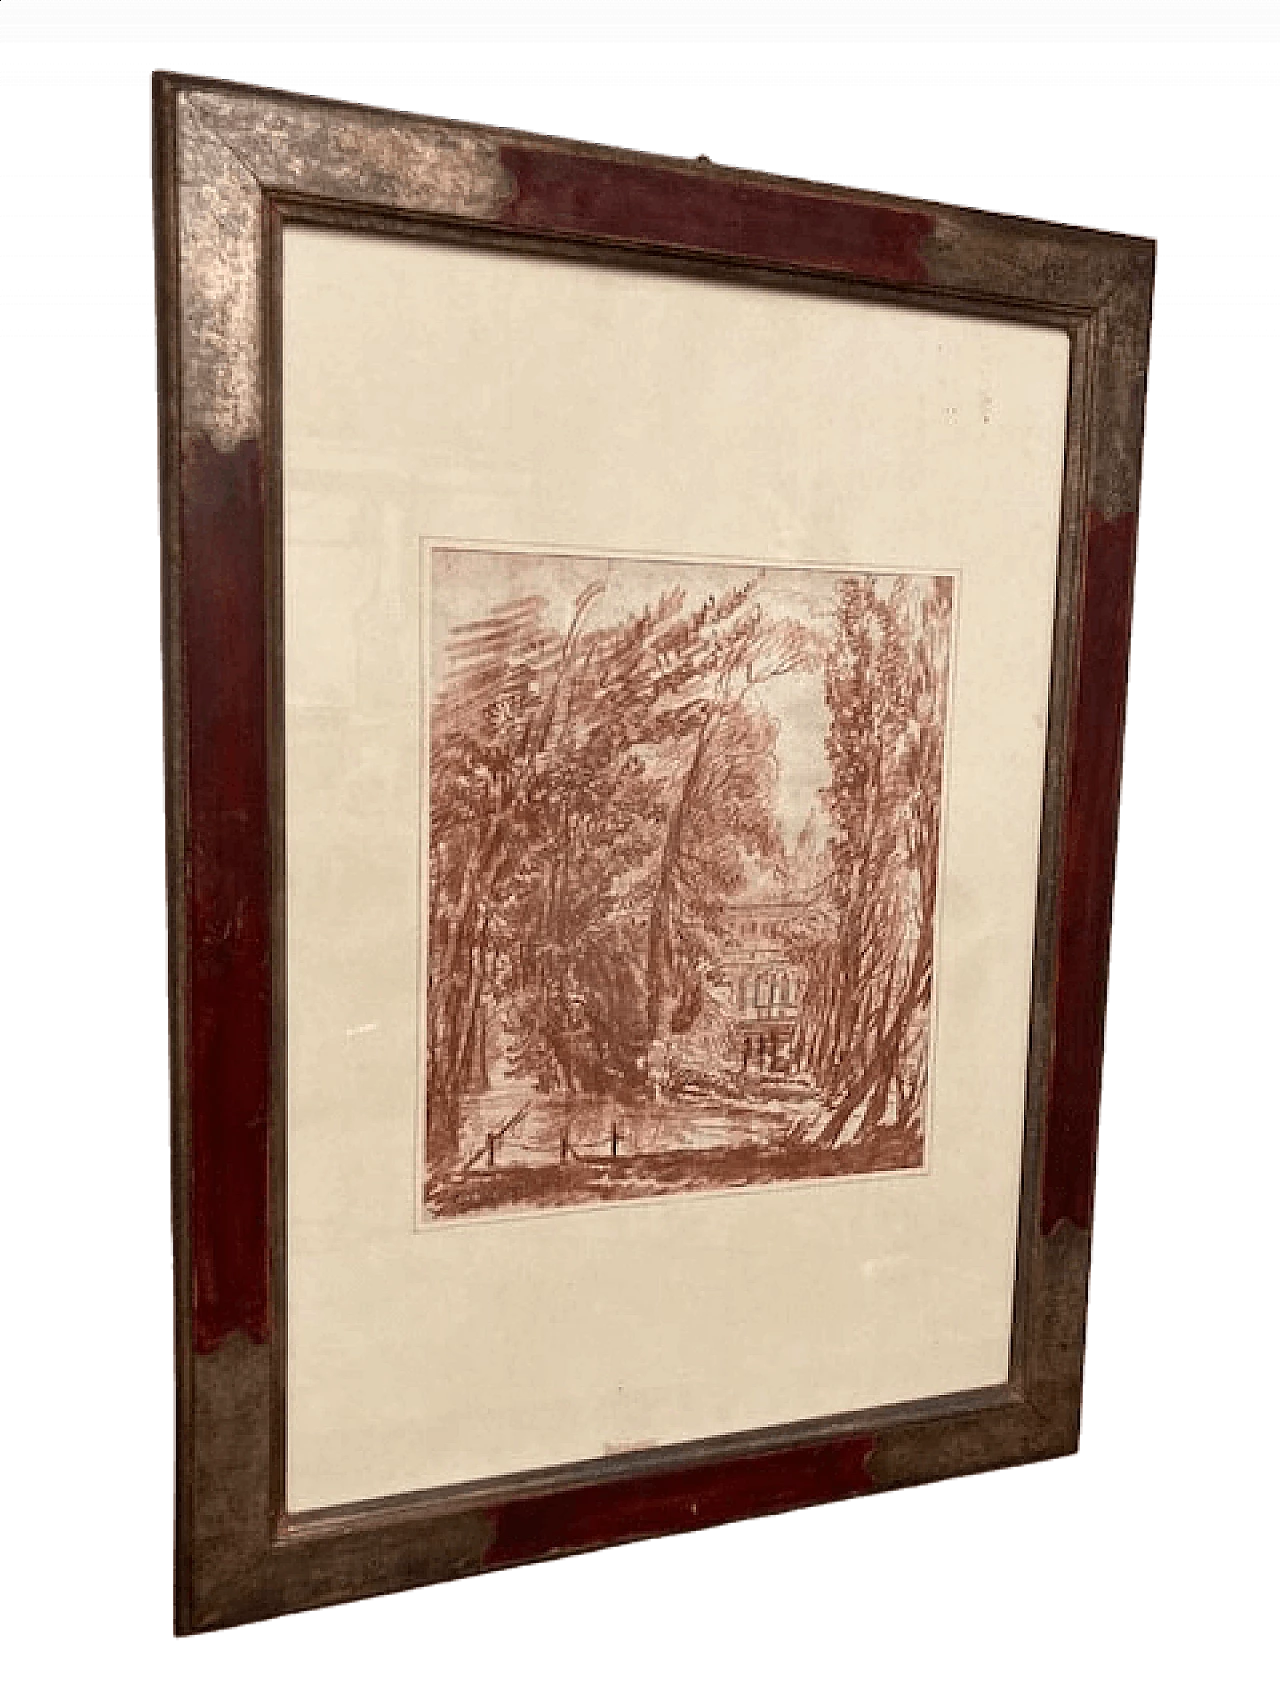 Sanguine pencil drawing of landscape, mid-19th century 11